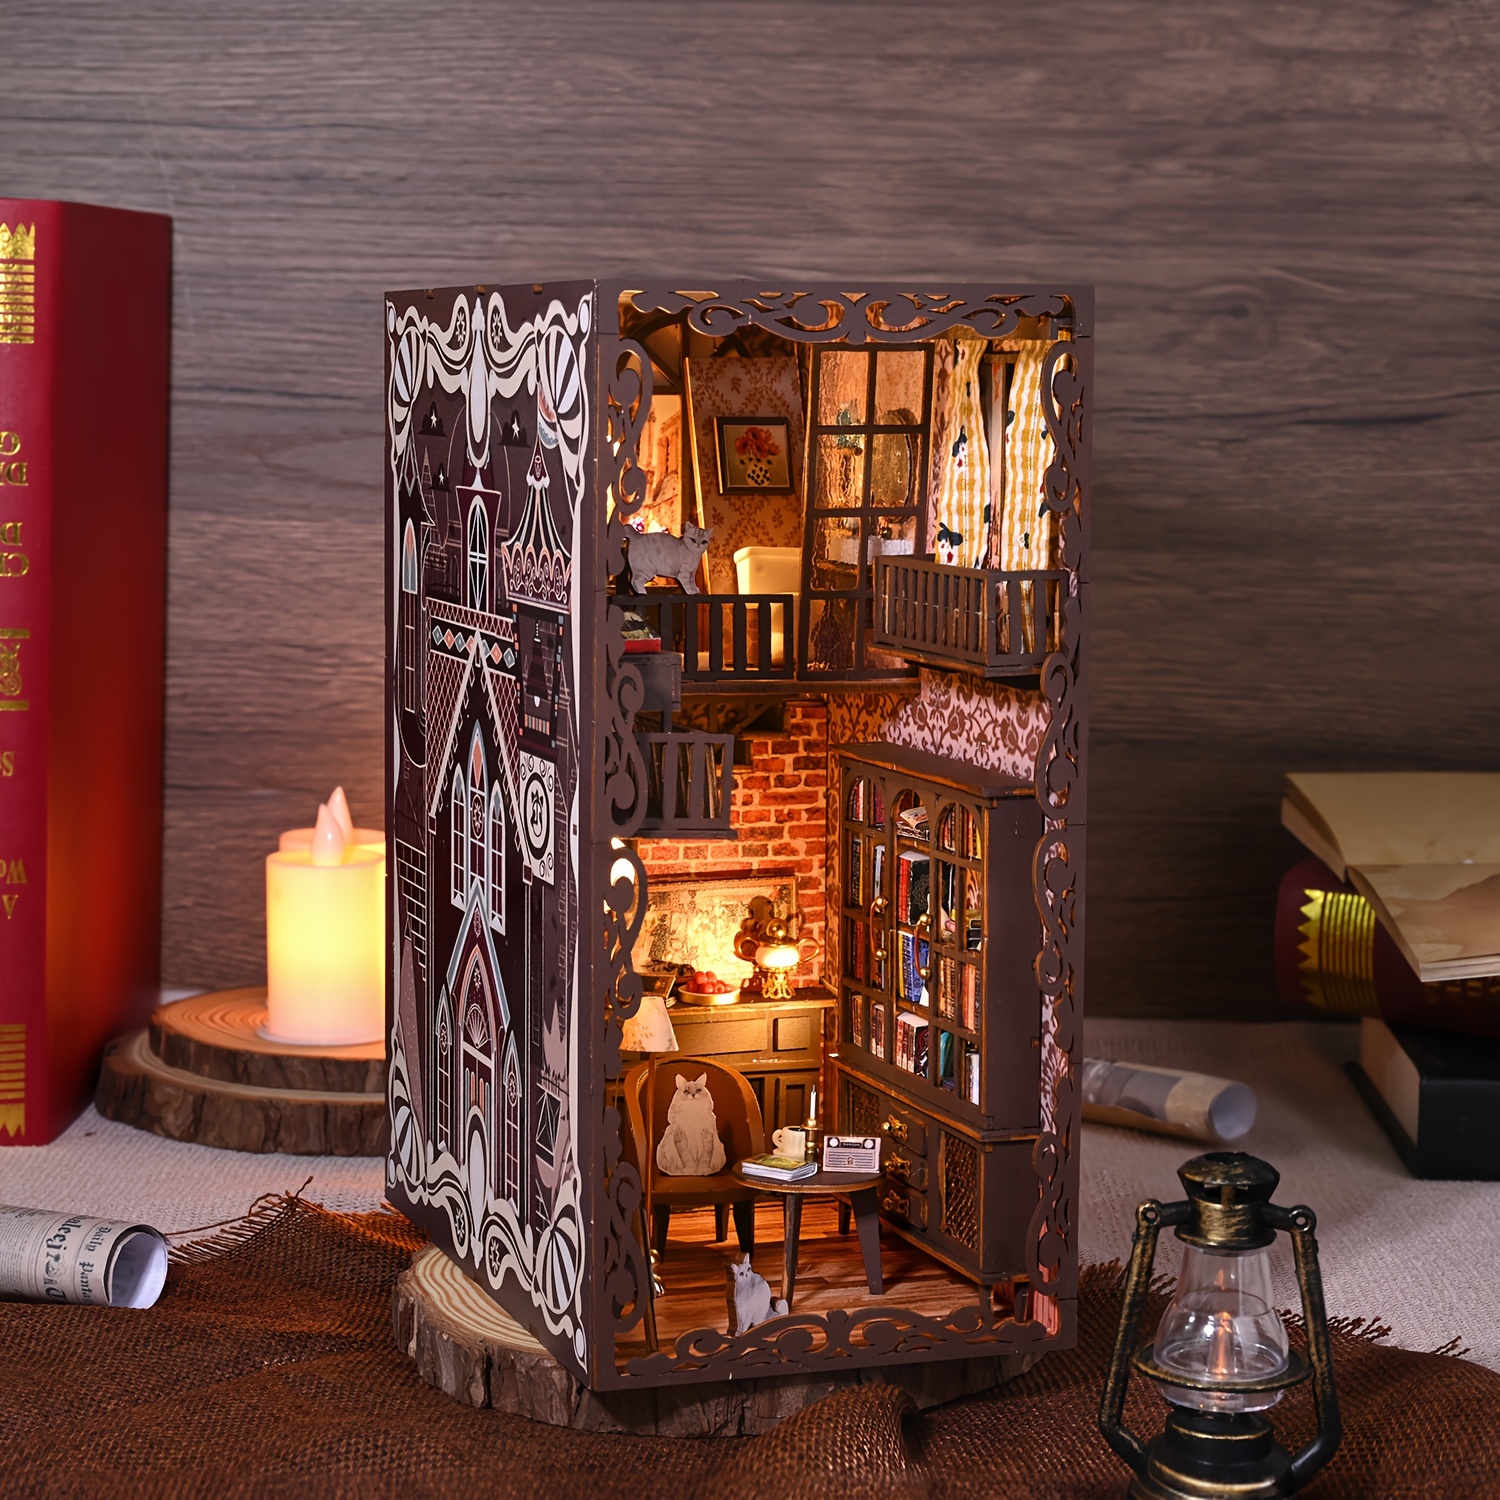 DIY Book Nook Kit Gifts Miniature Dollhouse Kids Adults Home Decor